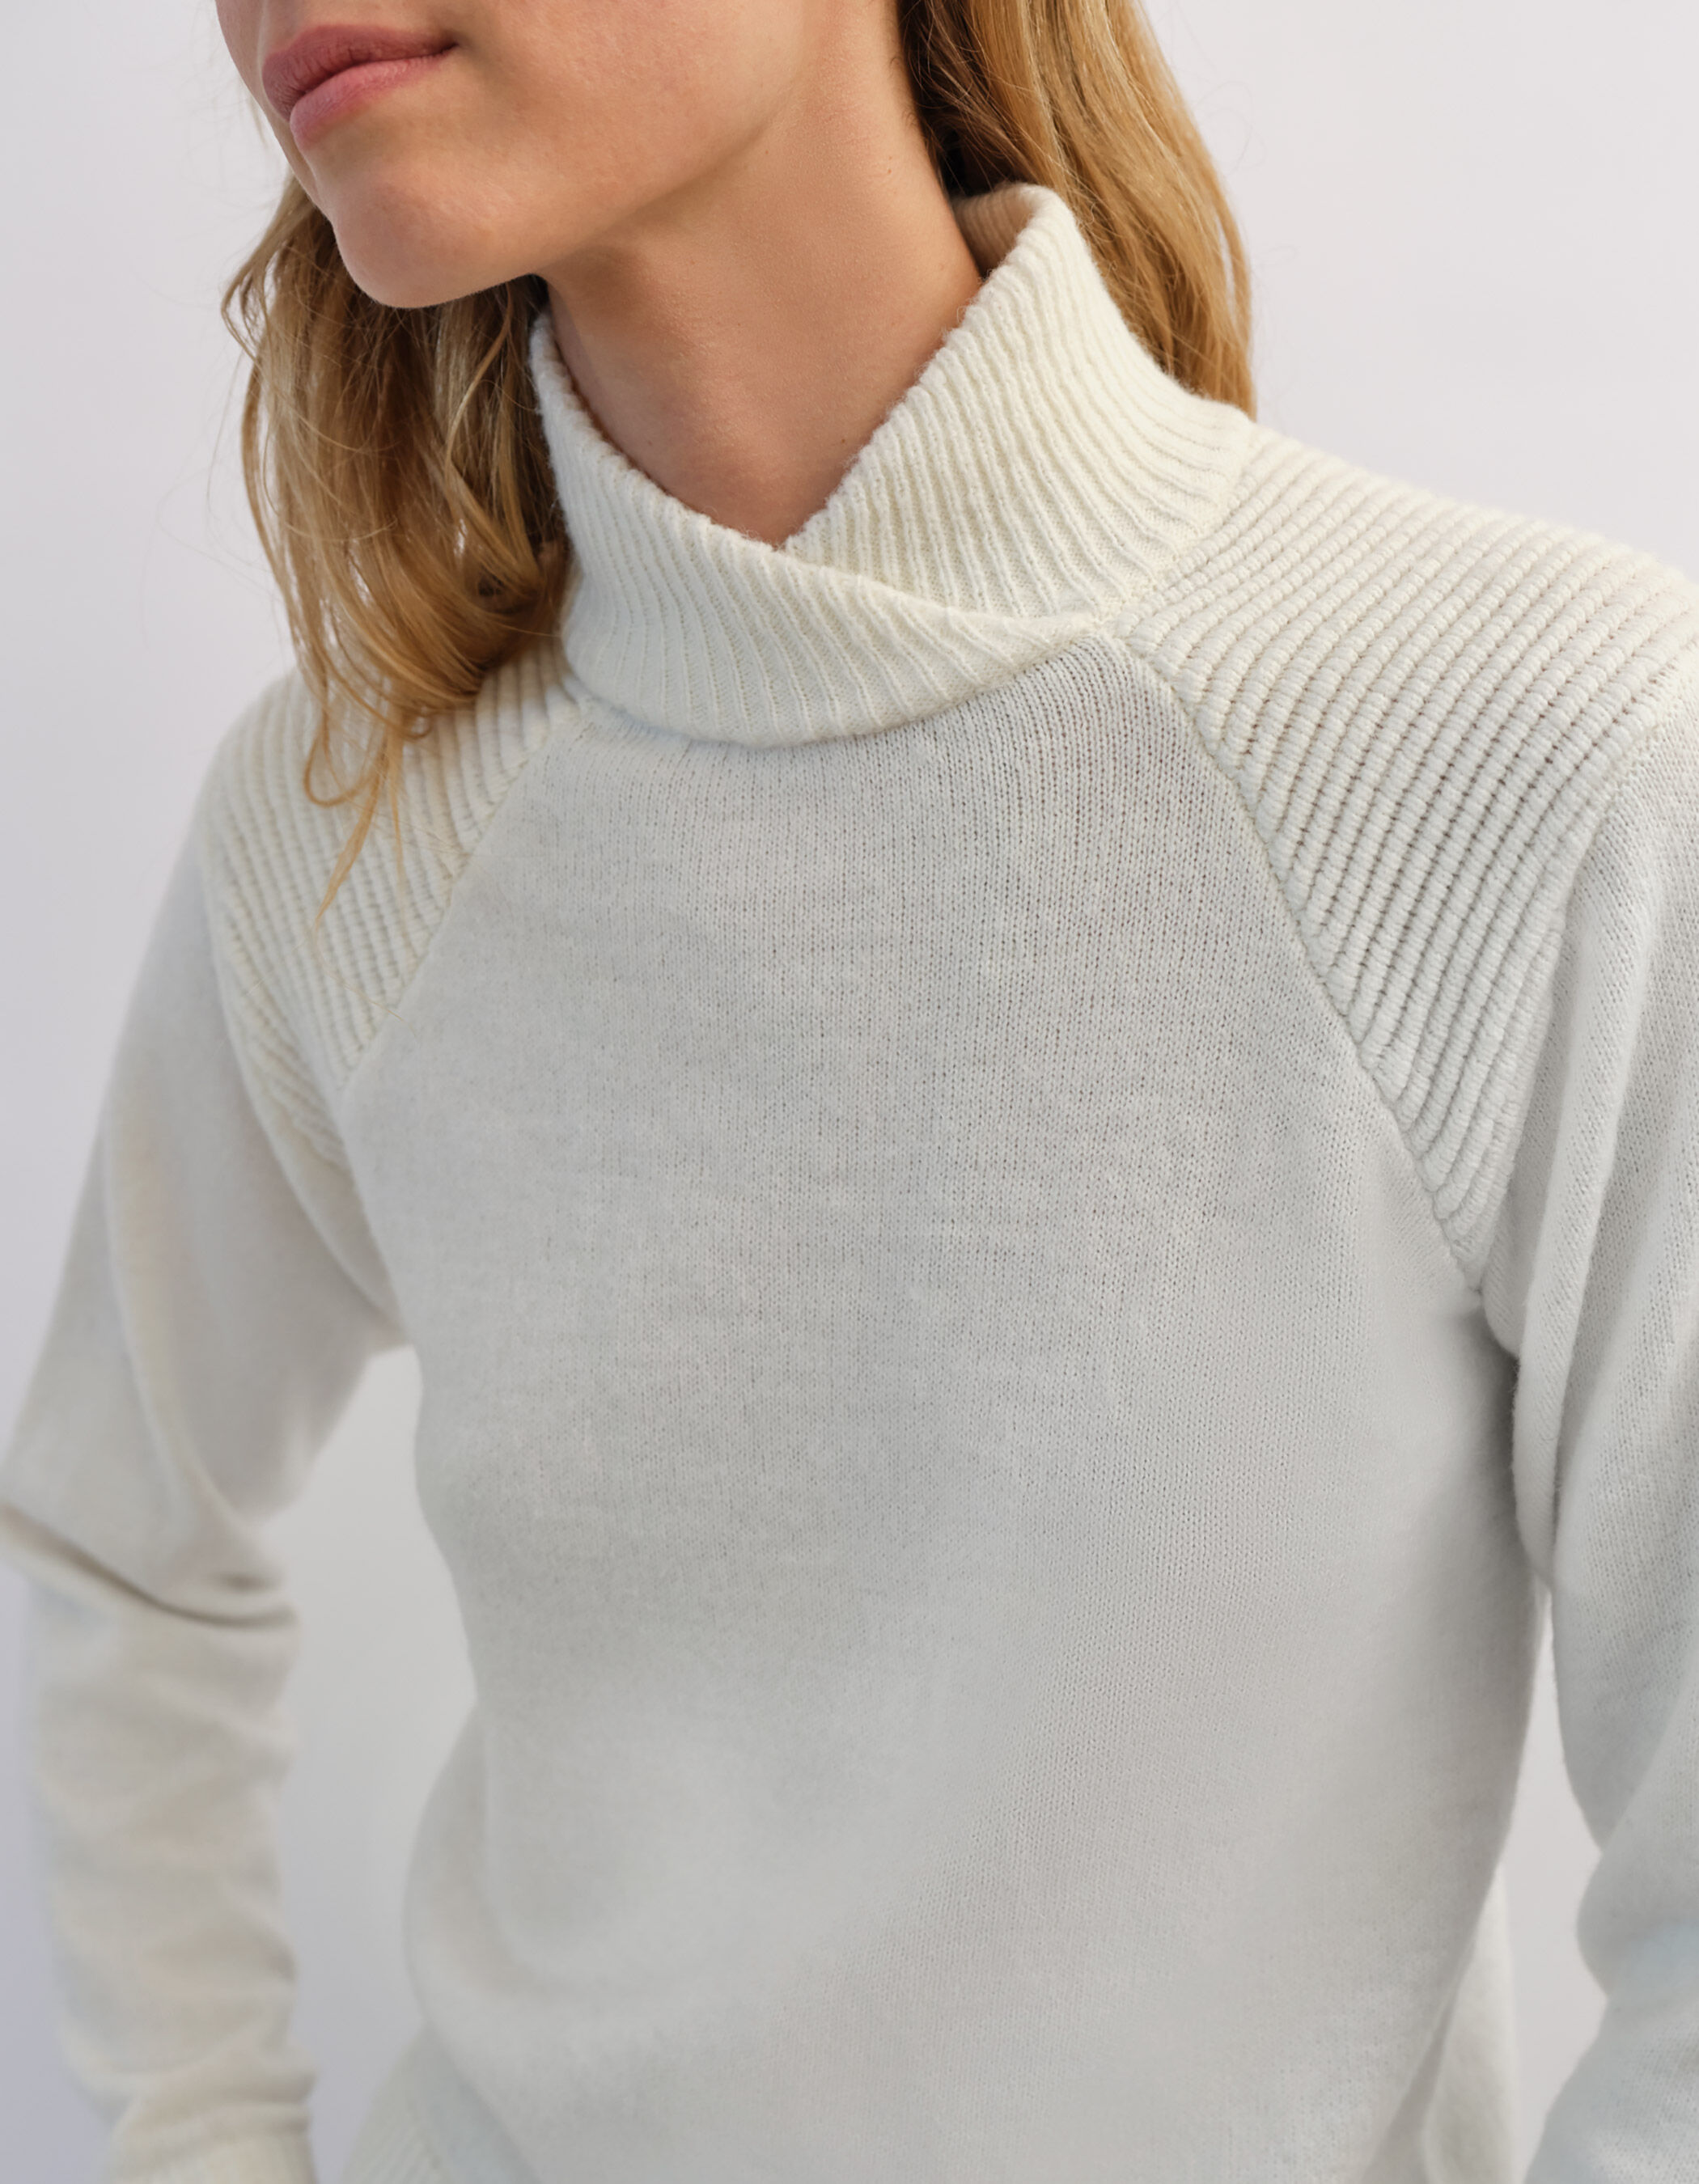 Women's off-white fluffy knit wrap high-neck sweater